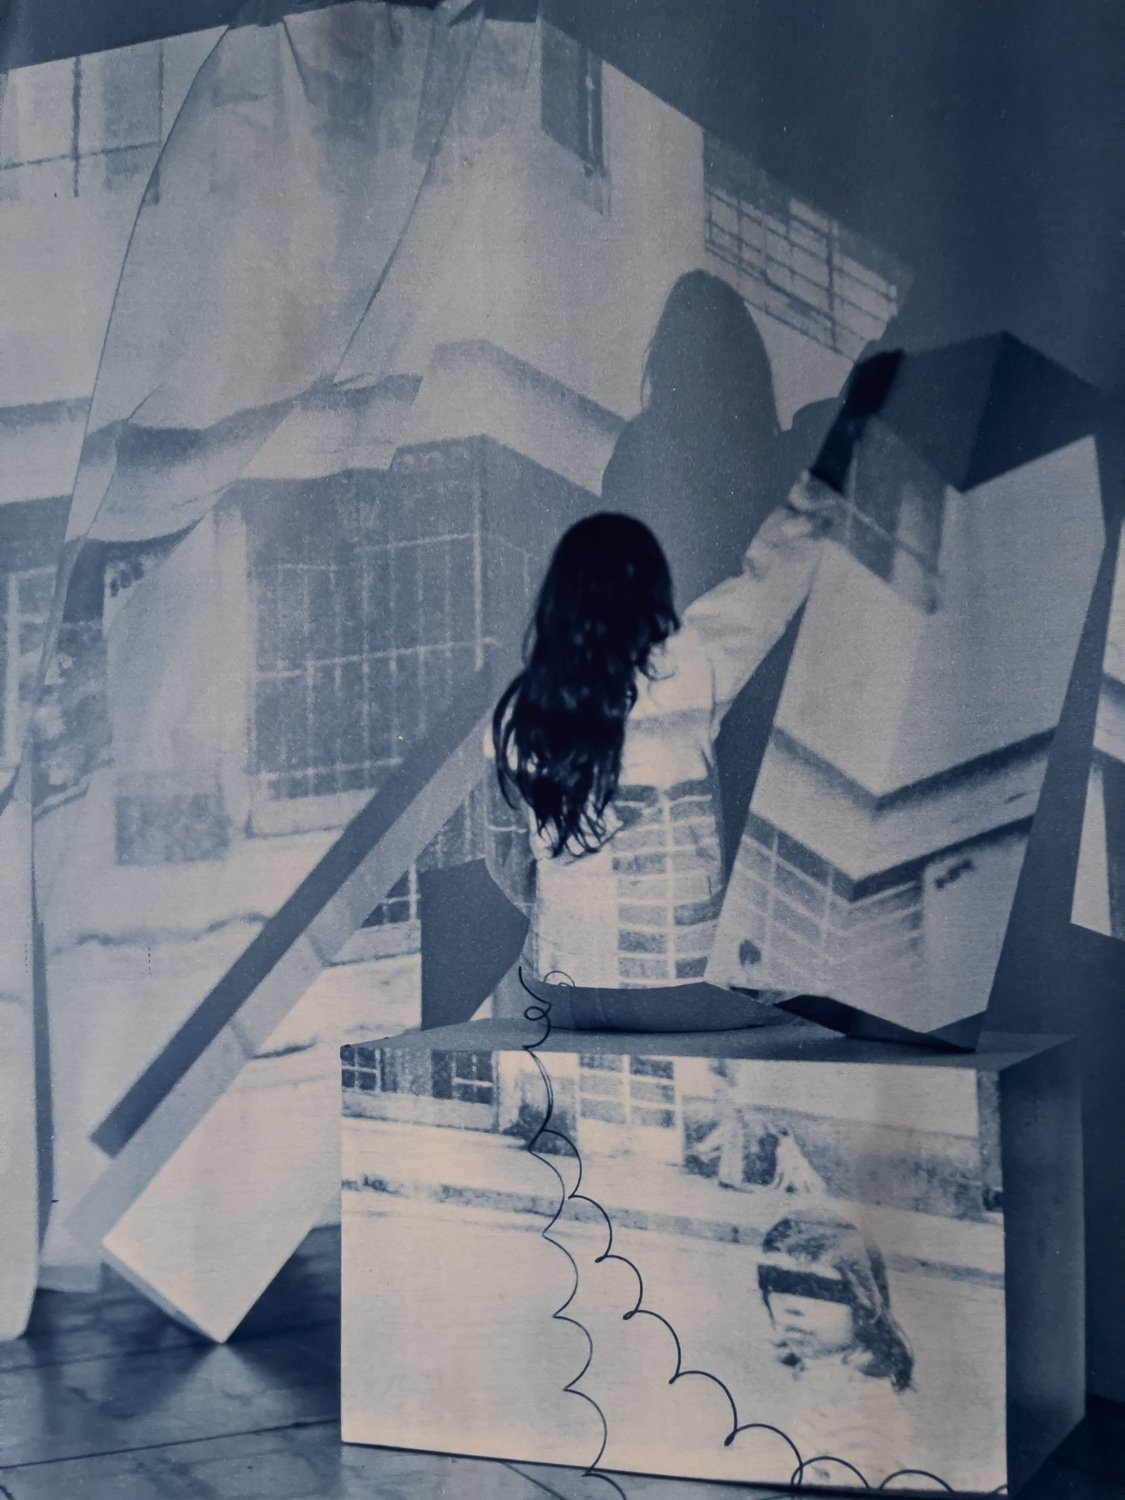 “Self Portrait as Building with Child Prostitute, 1979 Lima, Peru/2019 Los Angeles, CA from 1979: Contact Negatives, 8x10 Cyanotype from 8x10 Negative, 2019 | 8 x 10 Ritter Field Camera + Kodak (Copy)